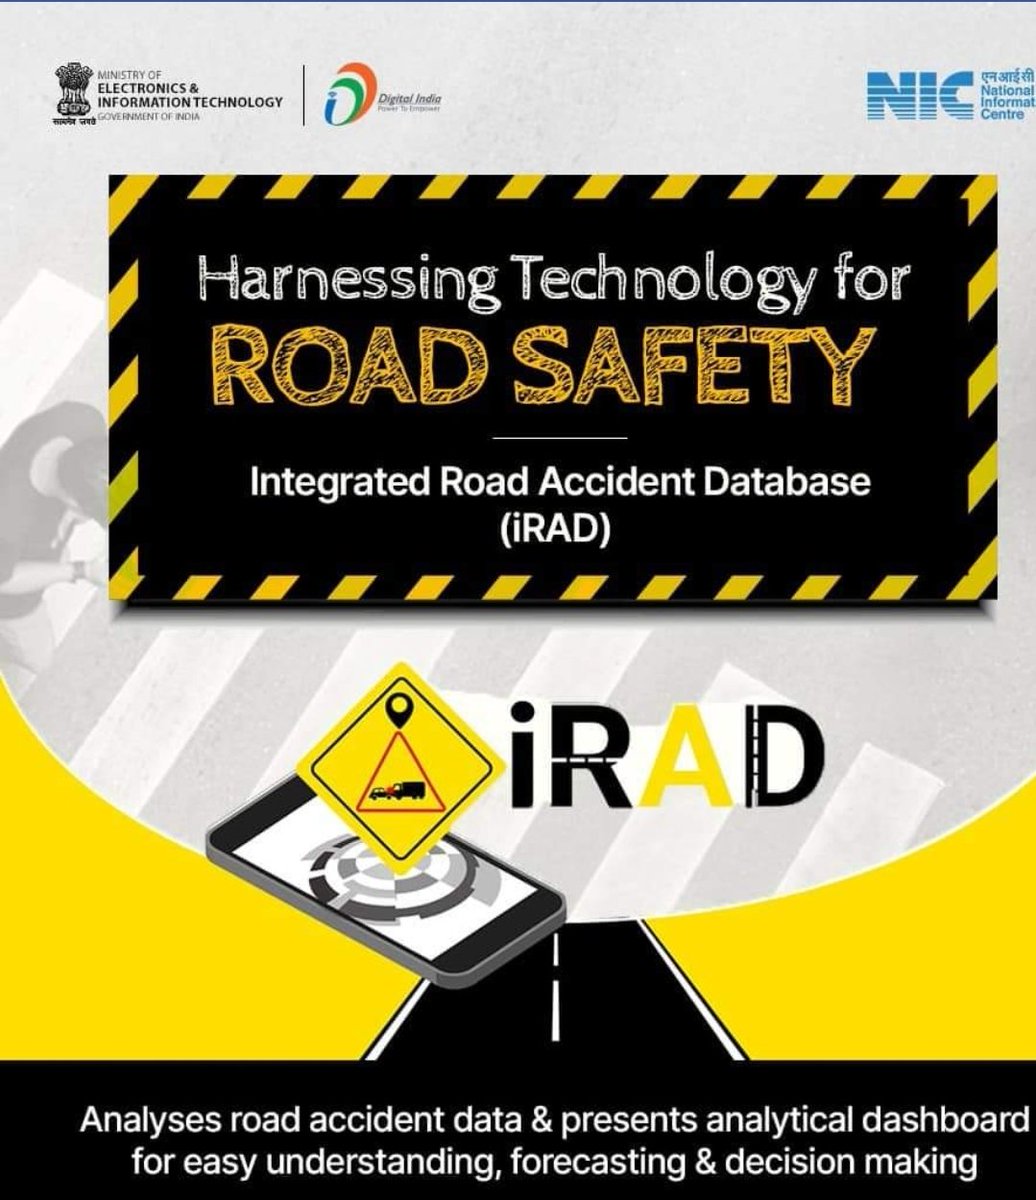 #integrated #RoadAccident #Database #Project #aims at improving #RoadSafety in #India by enriching #ACCIDENT #databases from every part of #Country#DigitalIndia#5G#AI#DigitalTransformation#construction#innovation#influencer#SocialMedia#roadtrip#SafetyFirst#Digital 